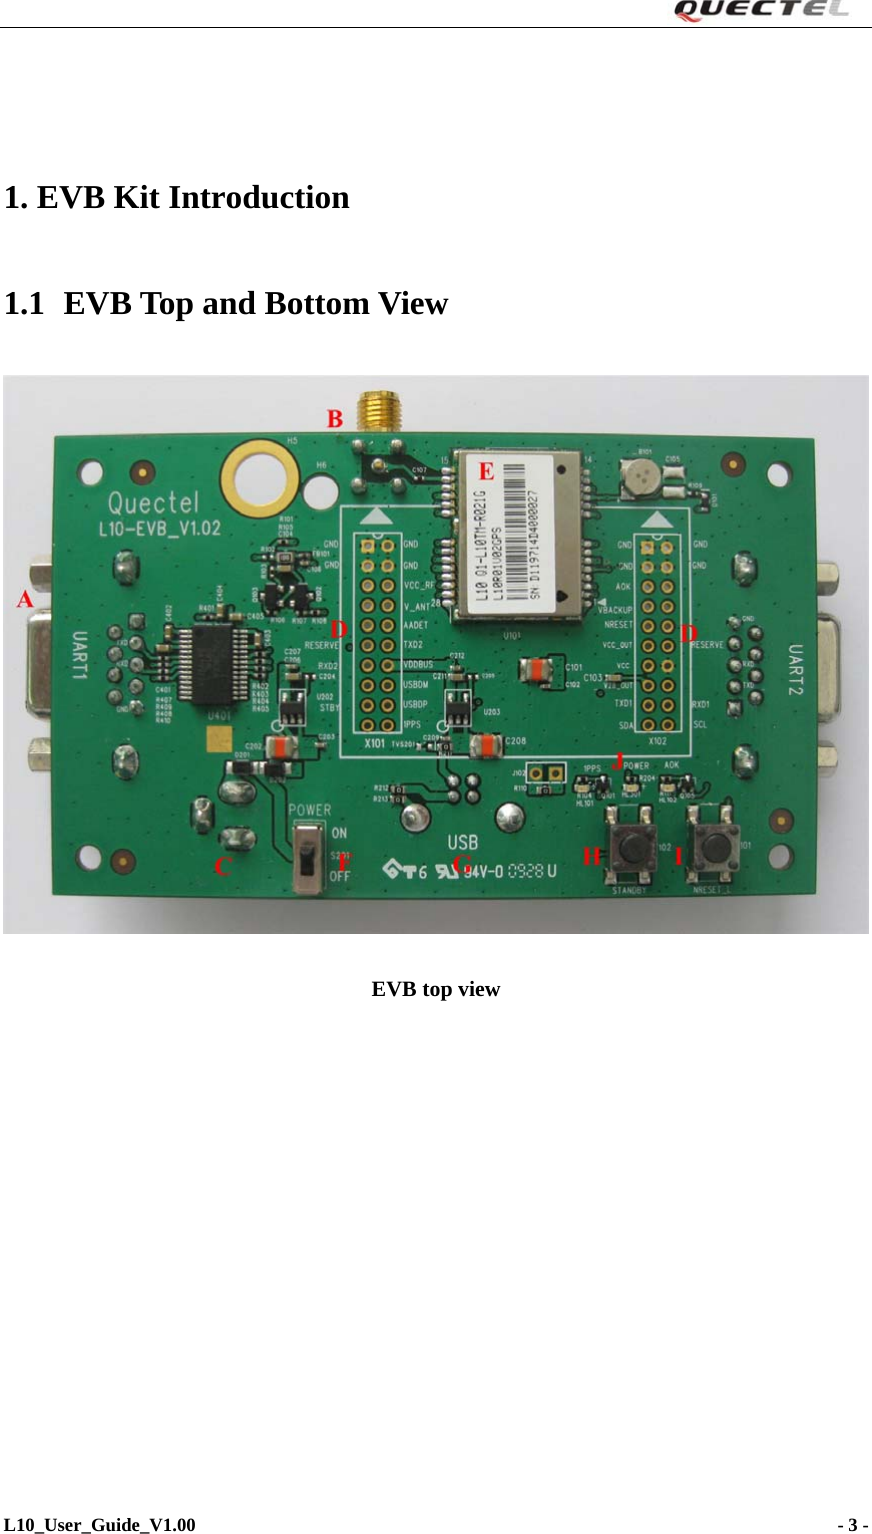                                                                       1. EVB Kit Introduction 1.1 EVB Top and Bottom View  EVB top view L10_User_Guide_V1.00                                                                     - 3 -   